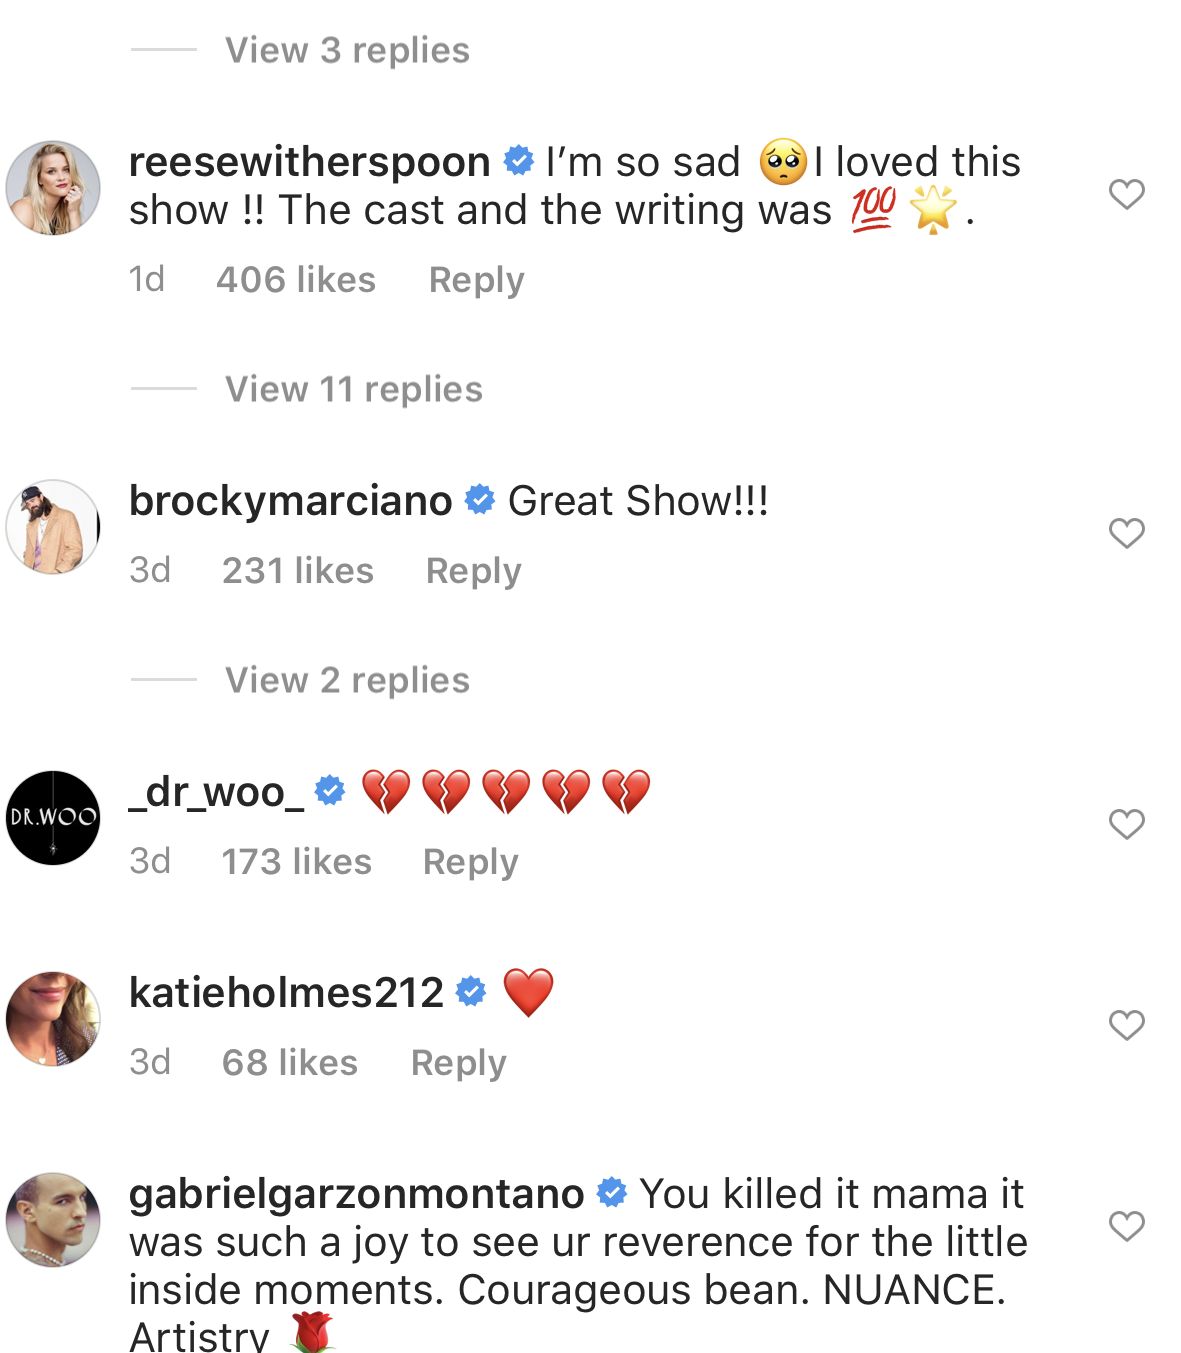 &quot;Boooo, damnit I loved it,&quot; commented by Jason Momoa and &quot;I&#x27;m so sad, I loved this show, the cast and writing was 100%&quot; commented by Reese Witherspoon